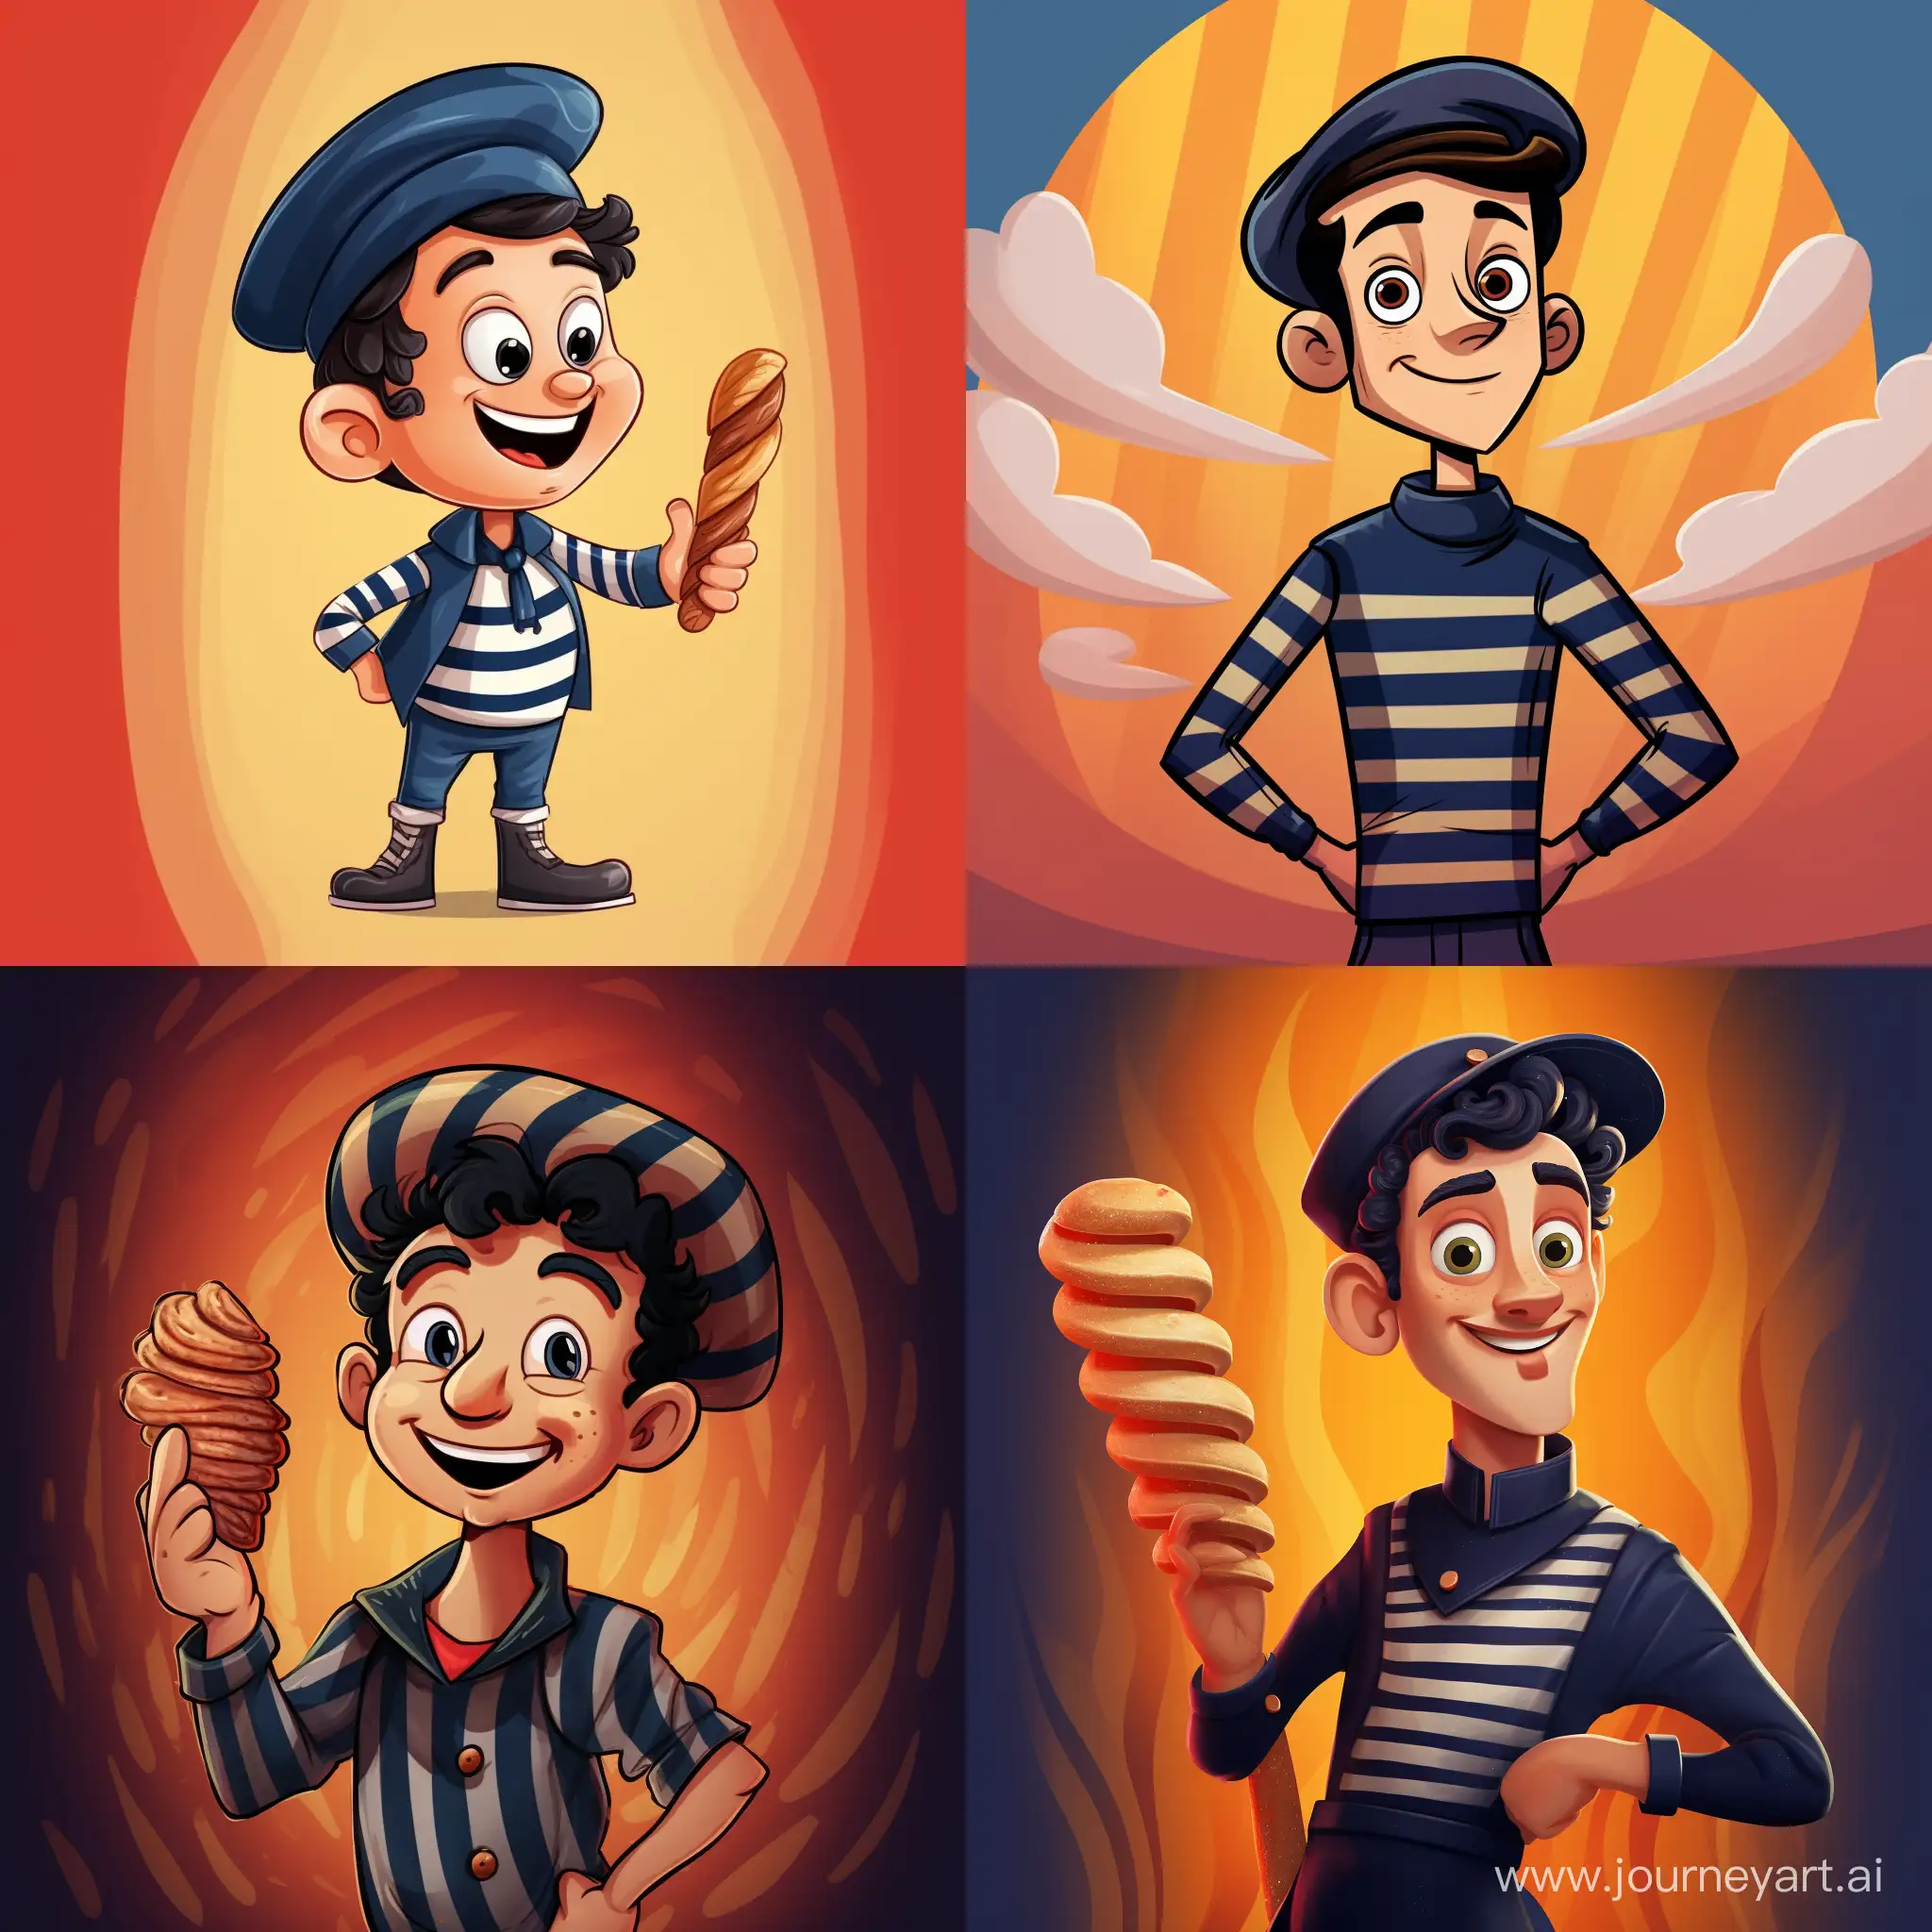 In a drawing cartoon art style. A character who is a caricature of the Frenchman with a baguette under his arm. The character has a beret and a striped sweater, in Pixar style